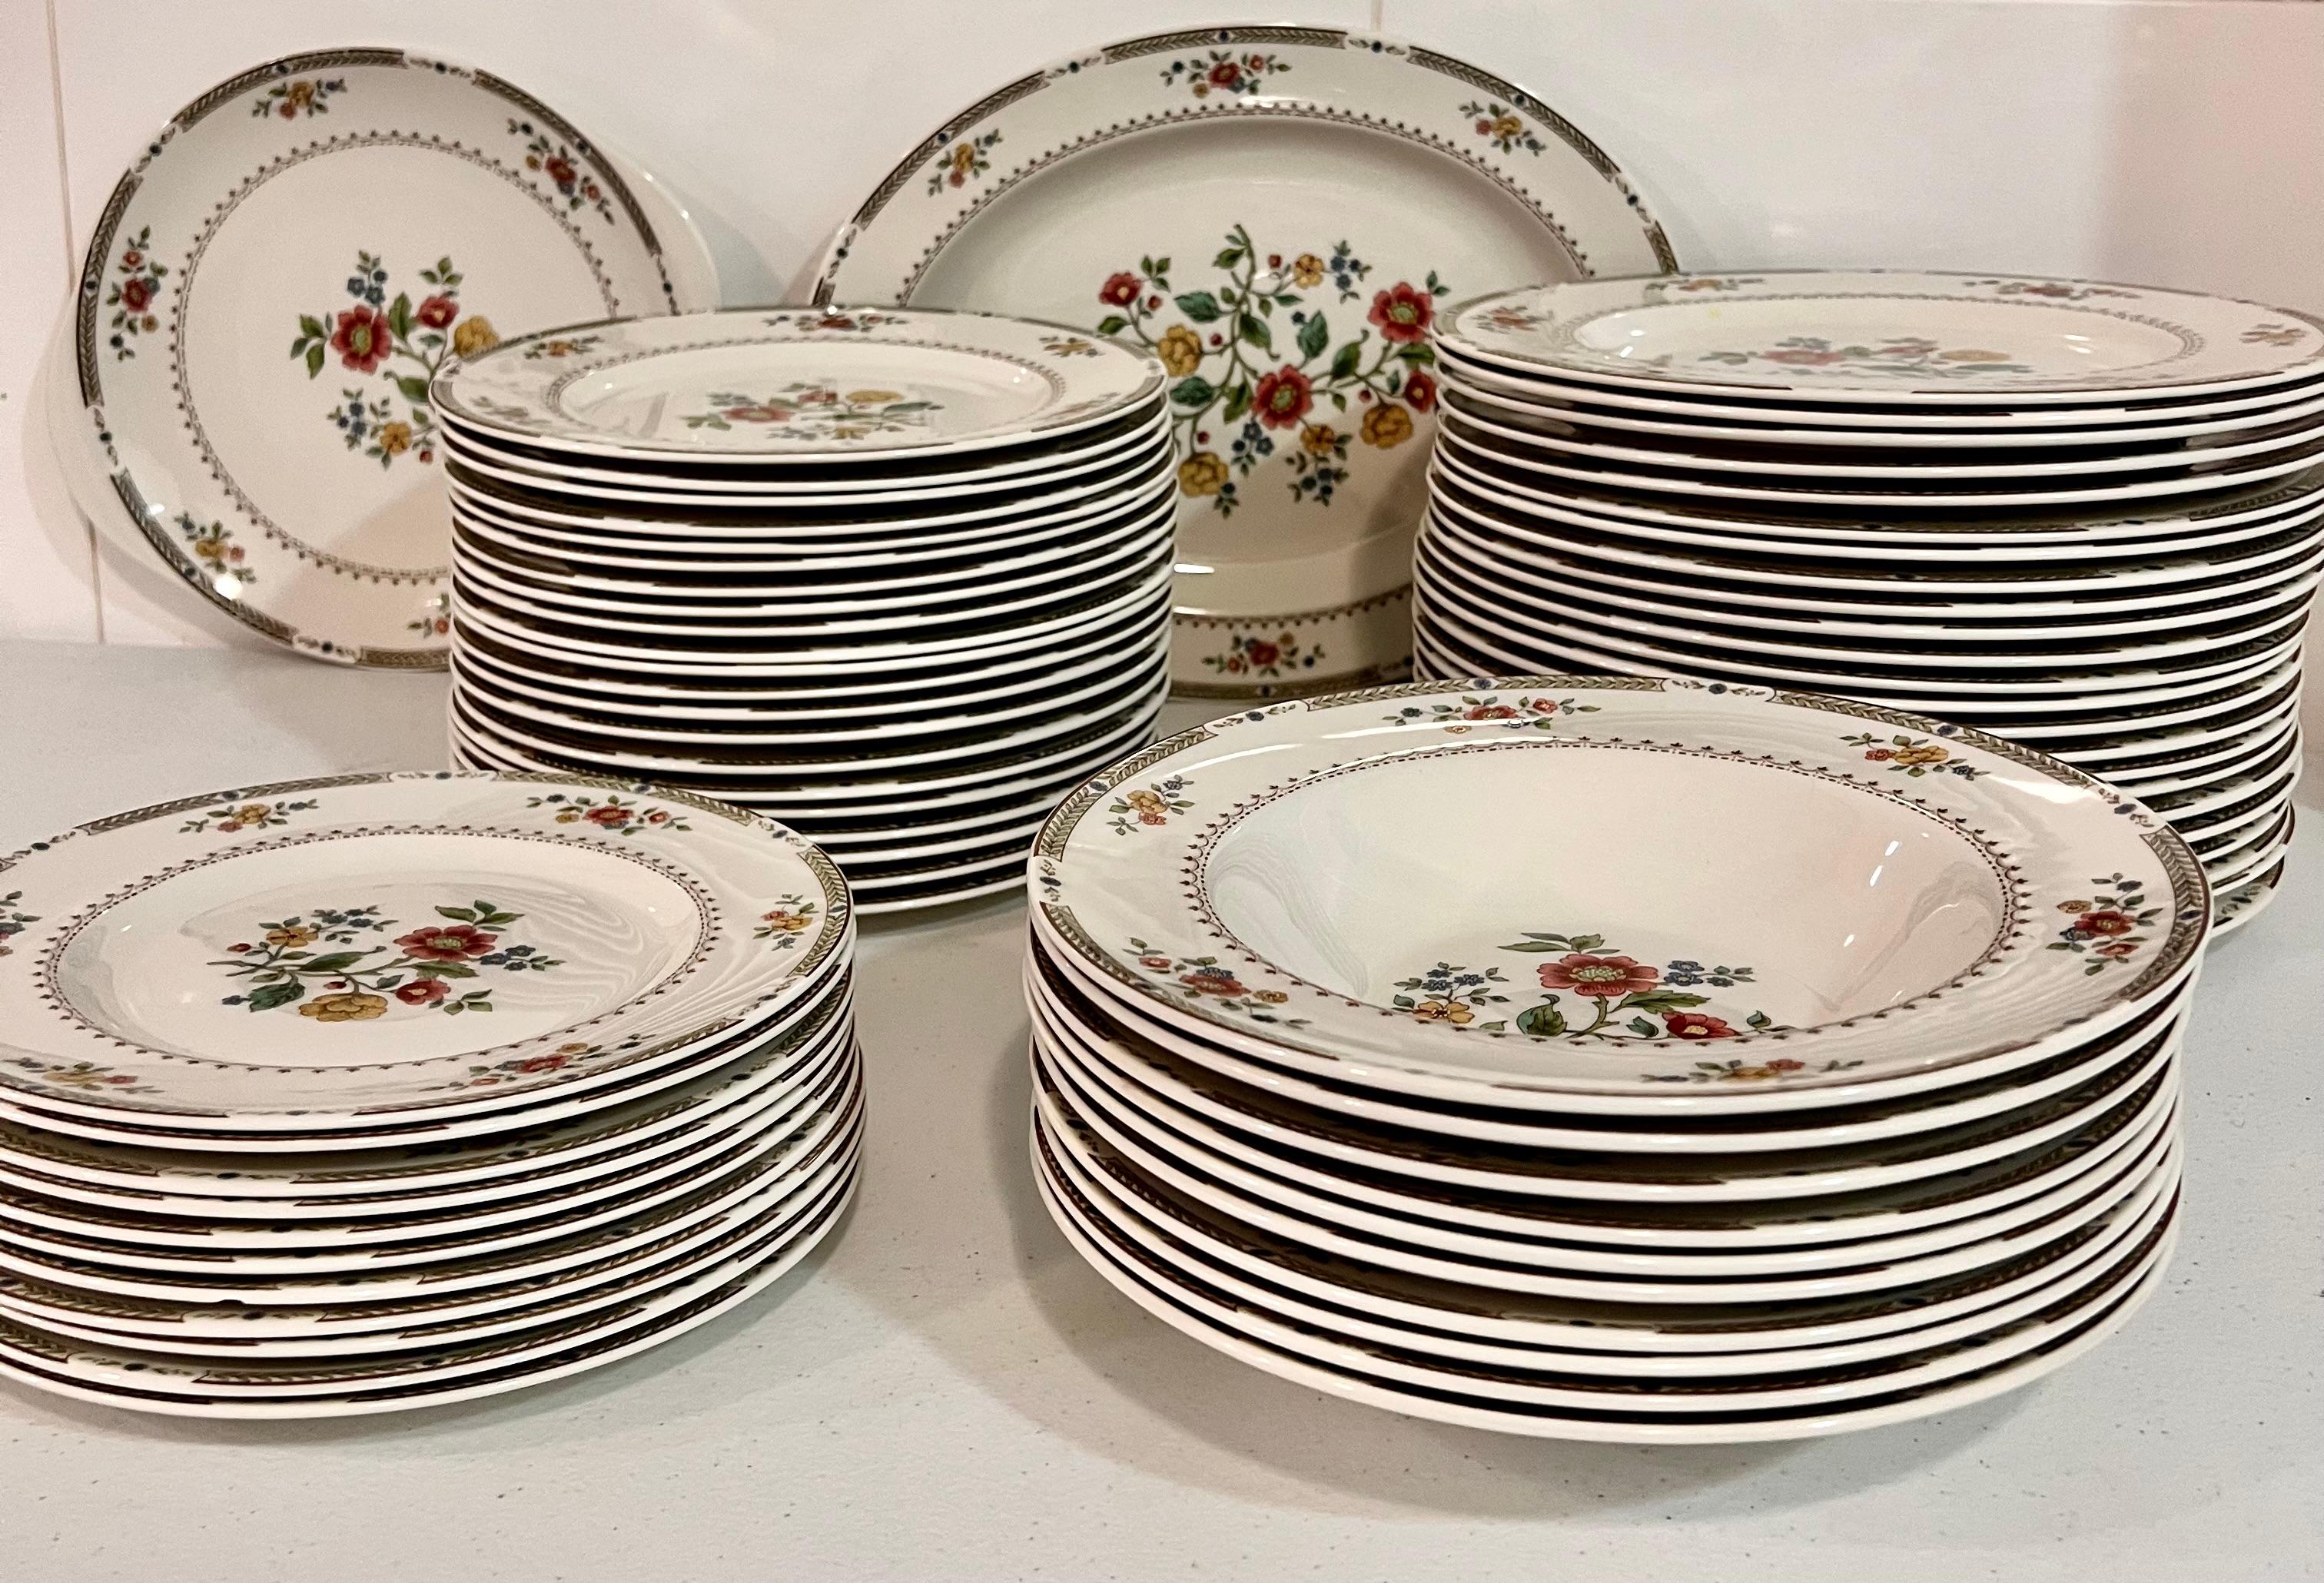 Large Rim soup bowl replacement Flatware & Dinnerware Minton Persian Rose by Royal Doulton.

Measures: Width: 9 1/8 in
Crafted In England
Hand Wash

Request info for flatware and diner ware 
we sell them individually or in sets
We have a